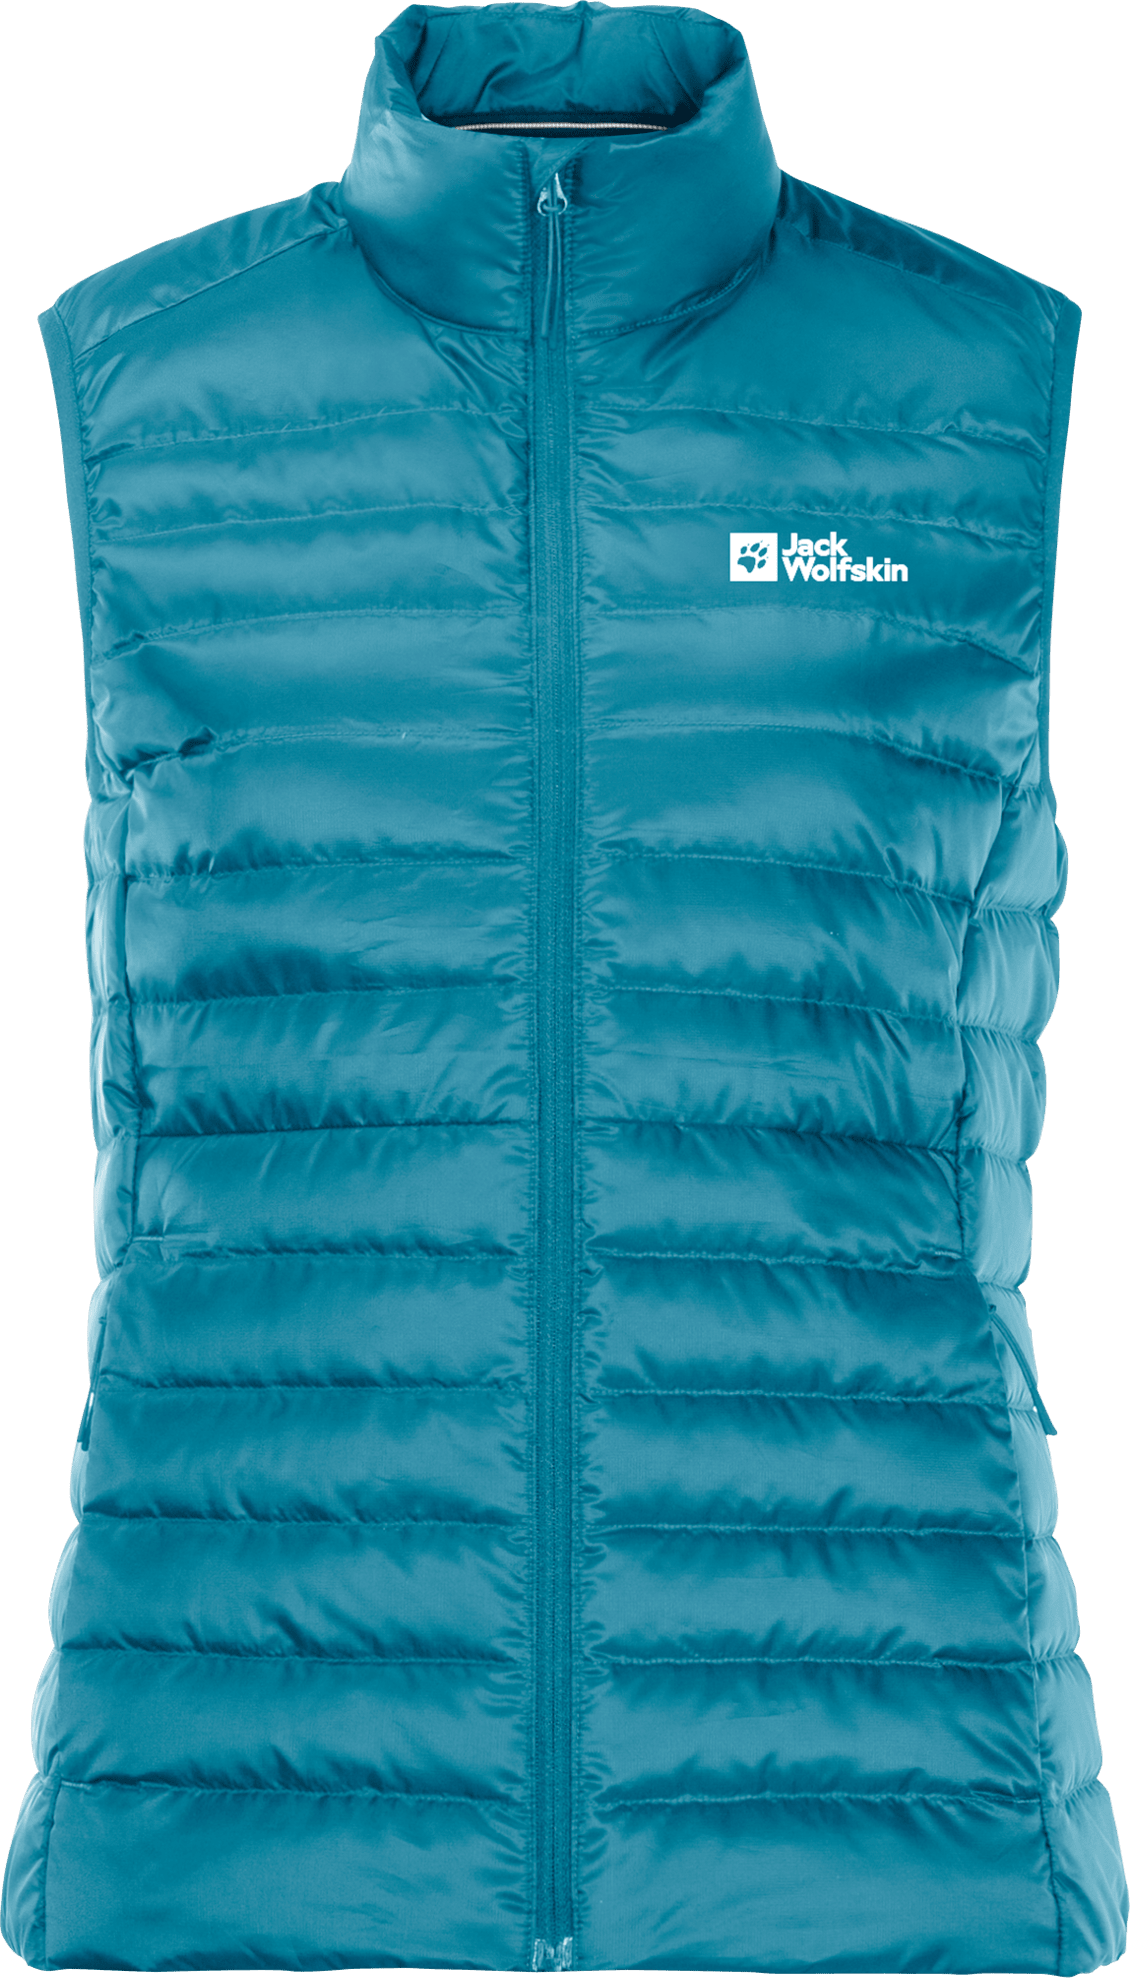 Buy Jack Wolfskin Women S Pack And Go Down Vest From Outnorth